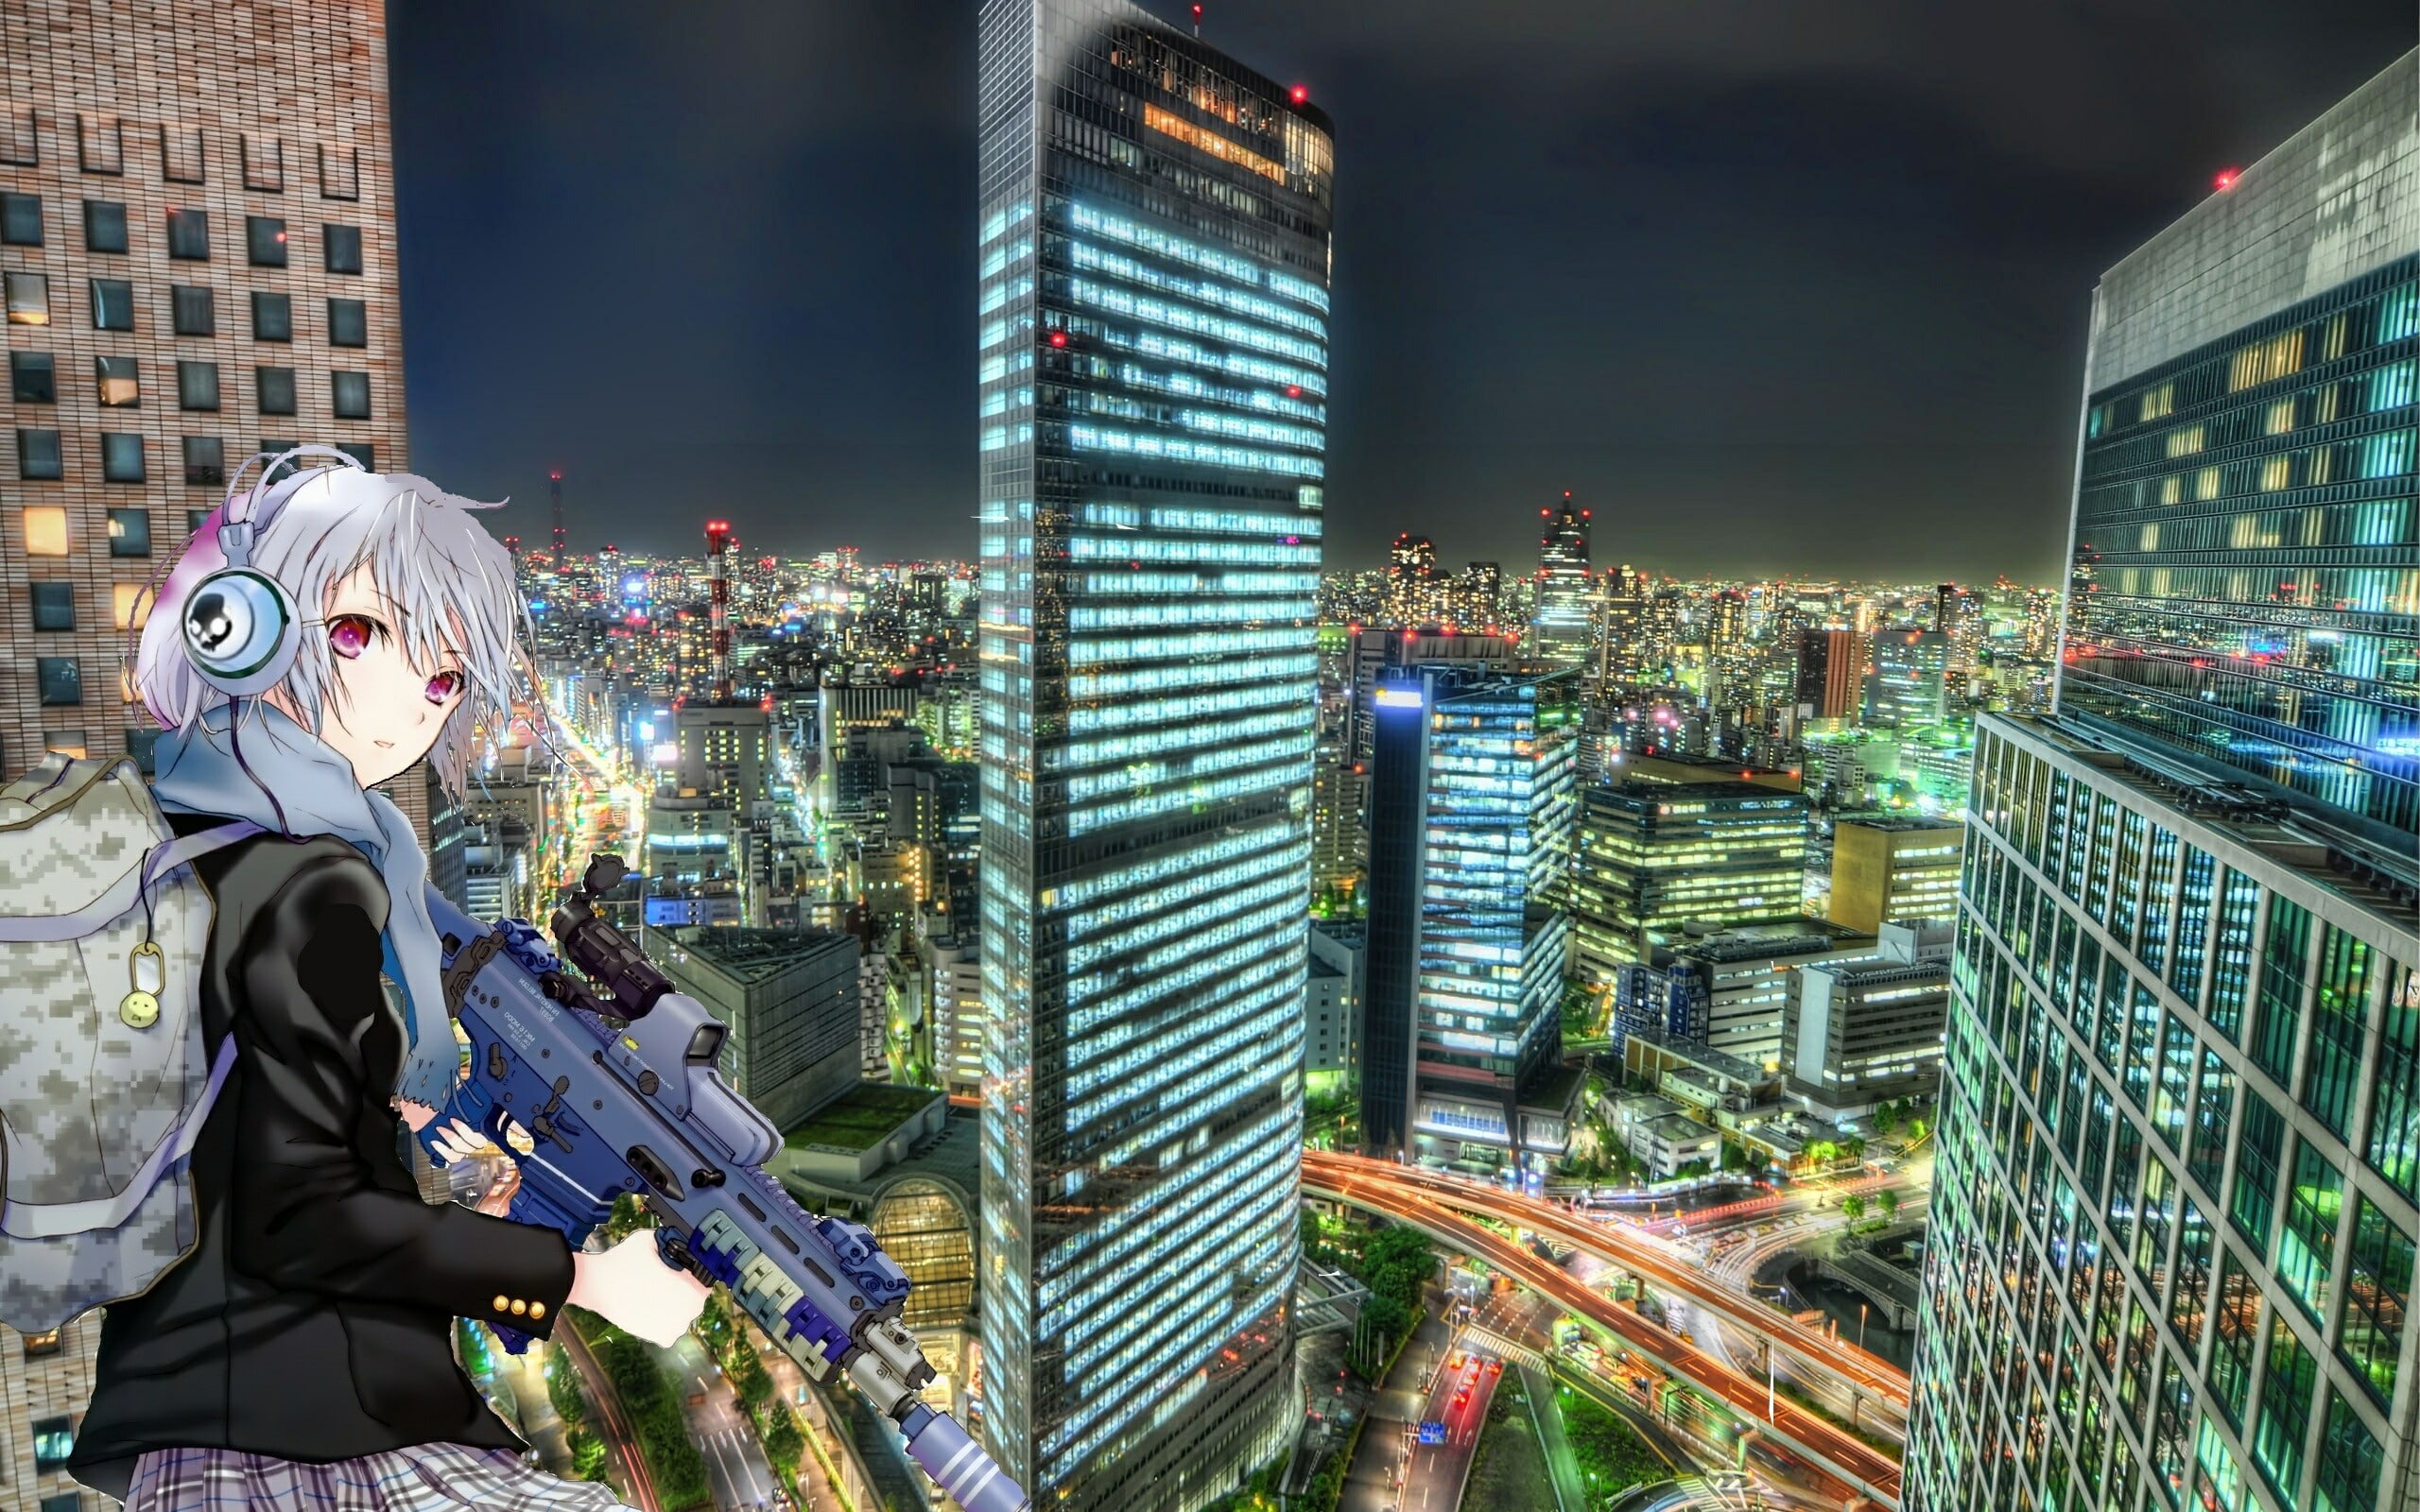 Cyberpunk, Futuristic, Anime Girls, City, Lights, Buildings, gray haired female animated character holding sniper gun